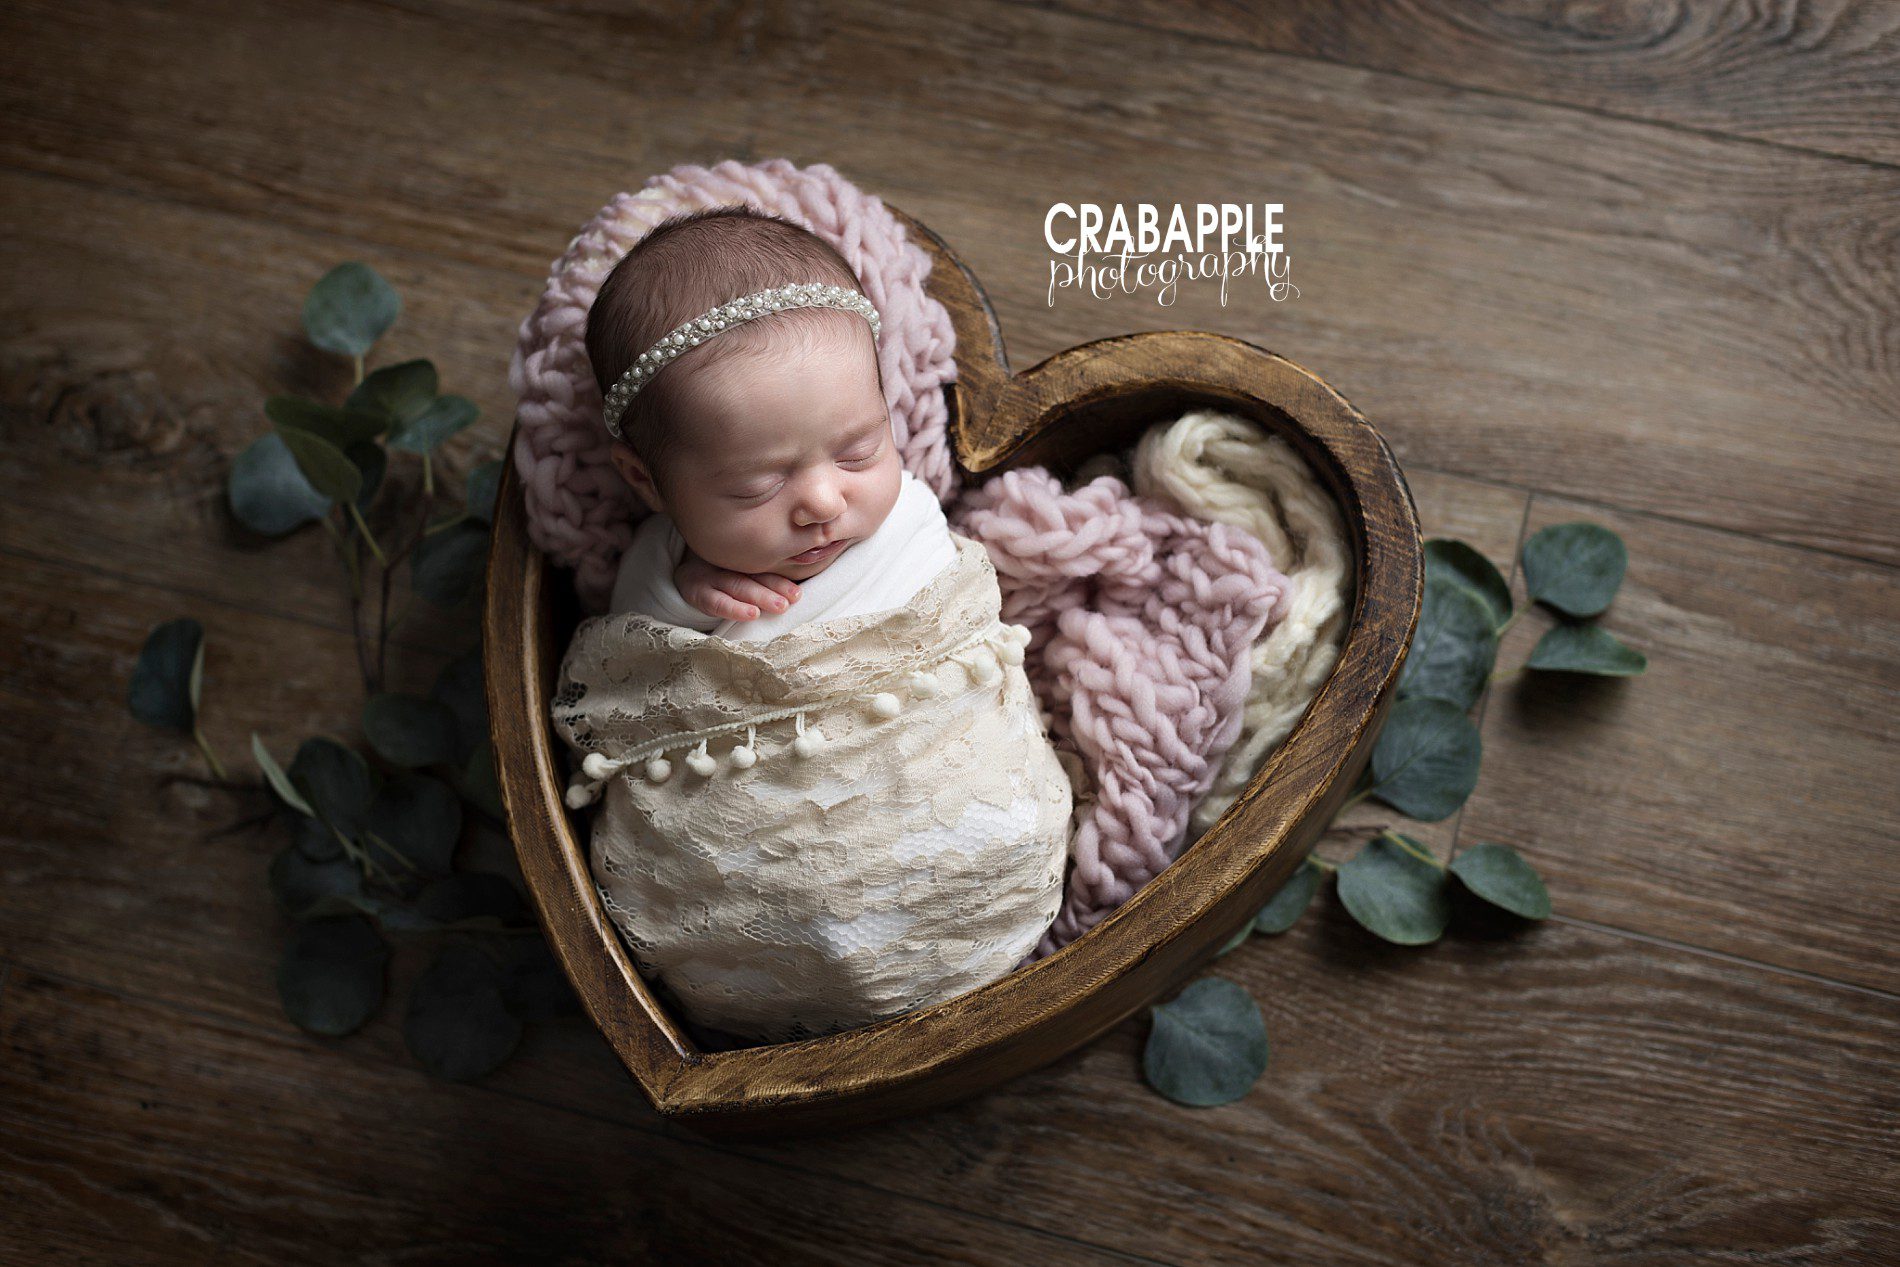 Ideas for styling newborn photos using faux greenery, wooden heart shaped bowl, chunky knit blankets, lace, headbands.